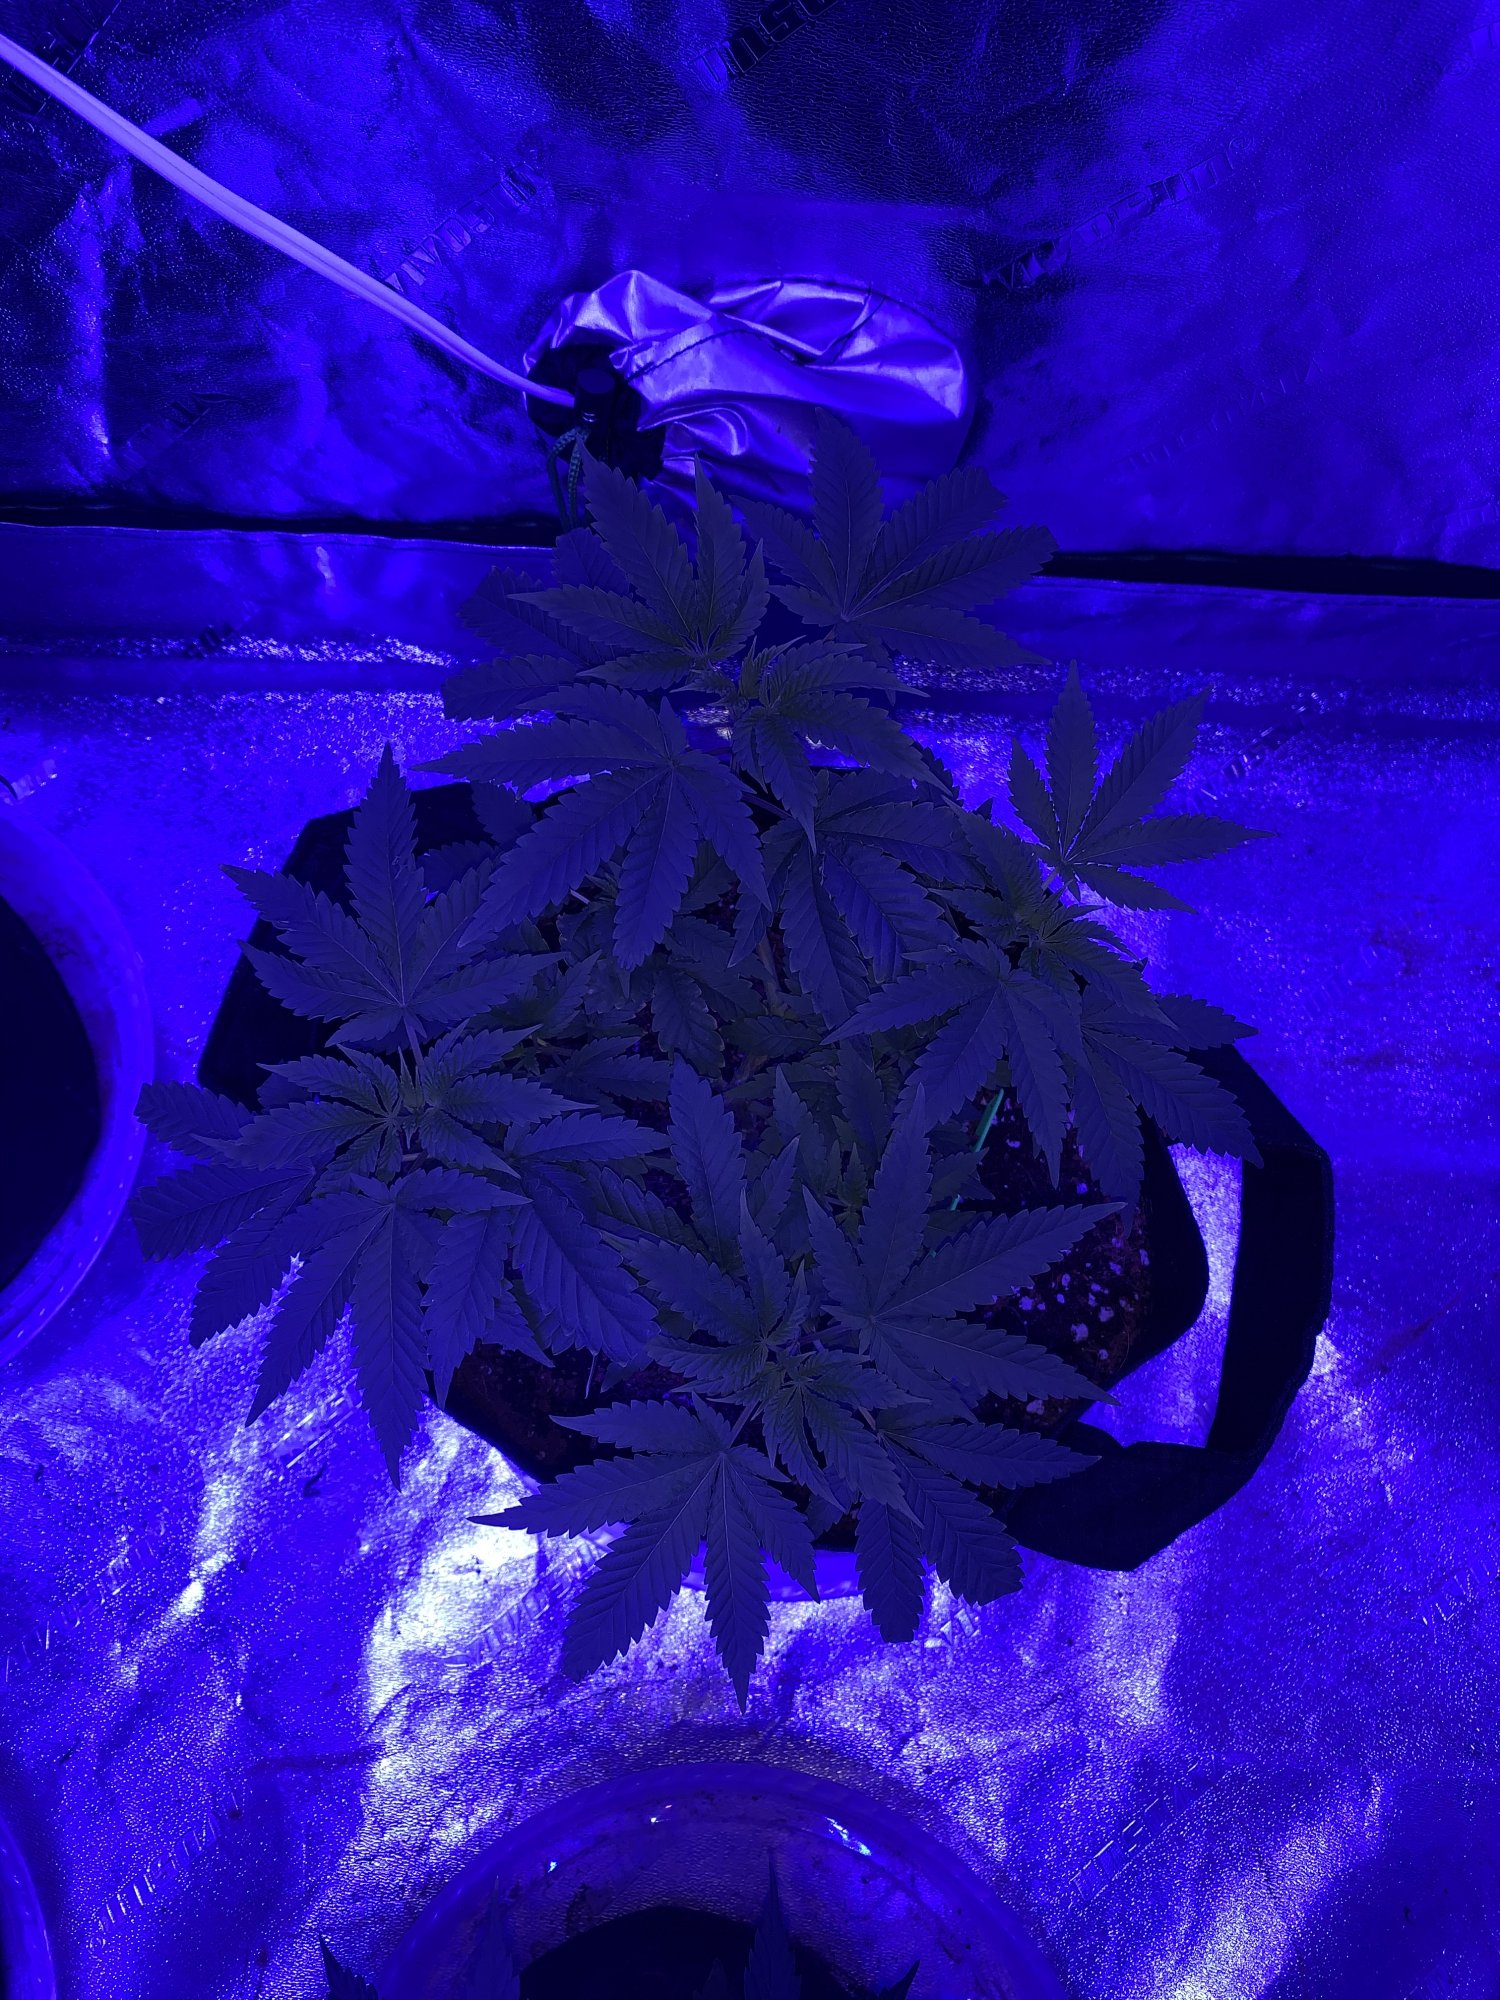 Are these too early to flip into flower 3